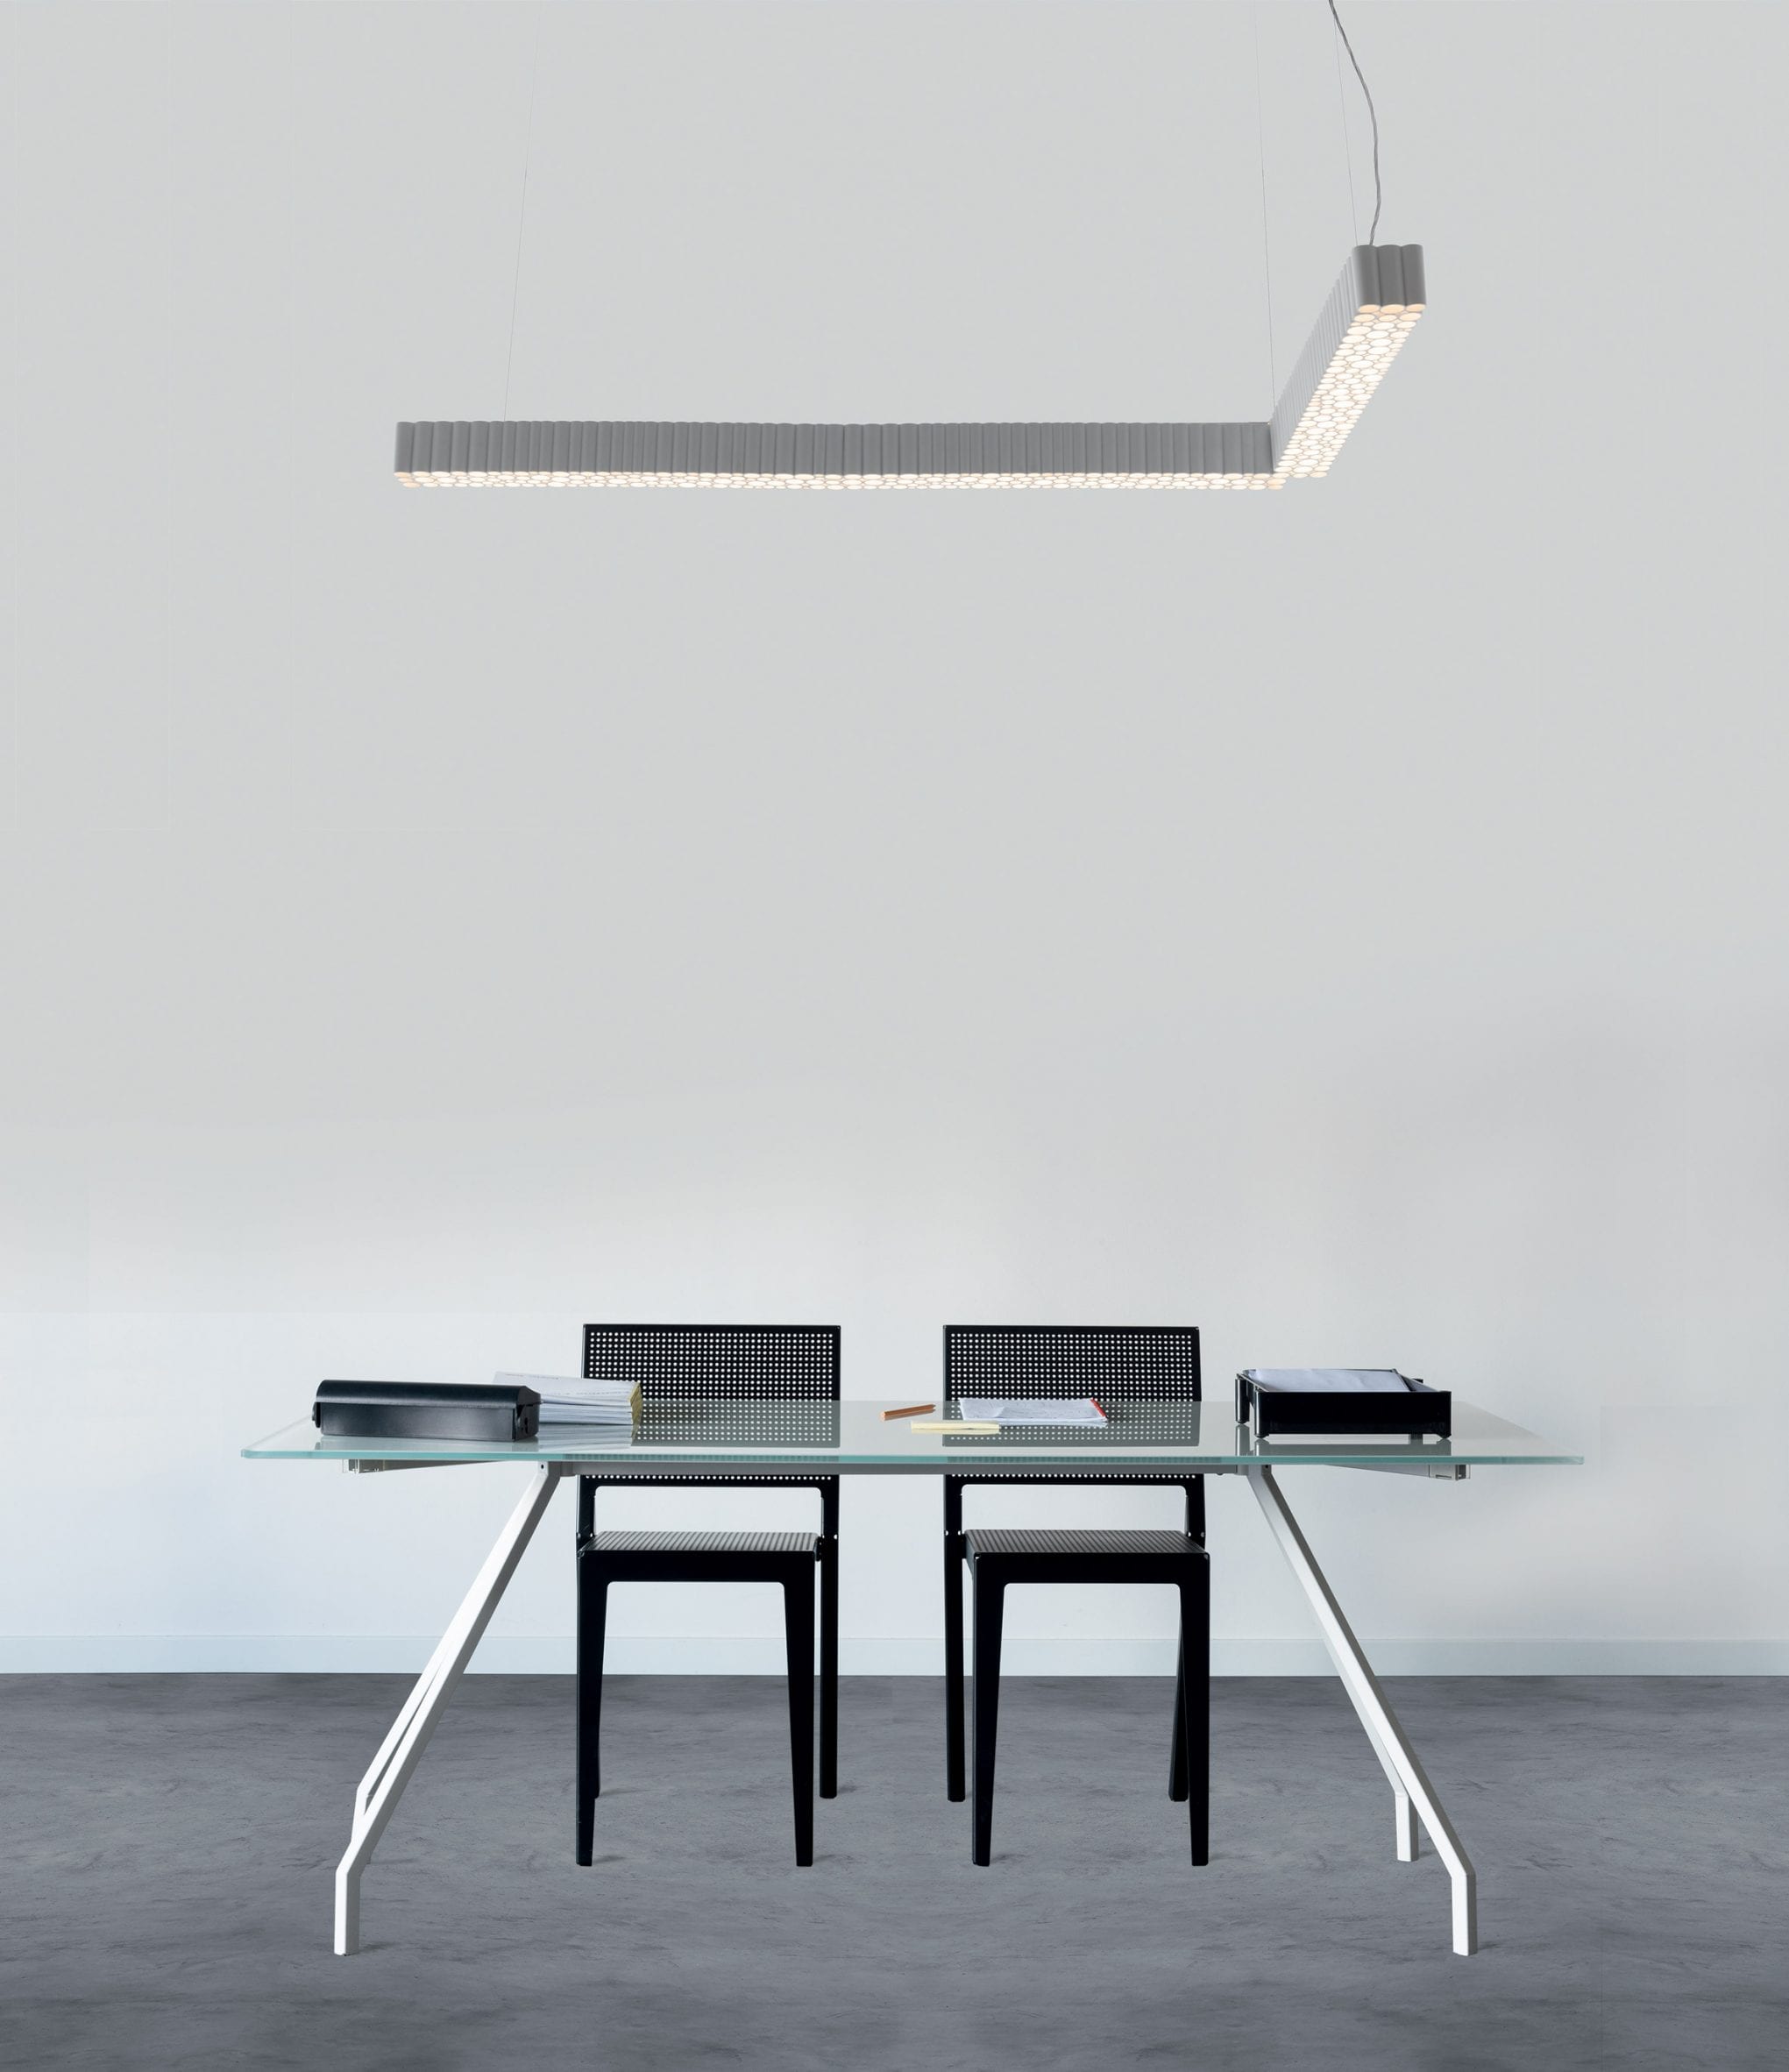 A Calipso light hanging above an office desk